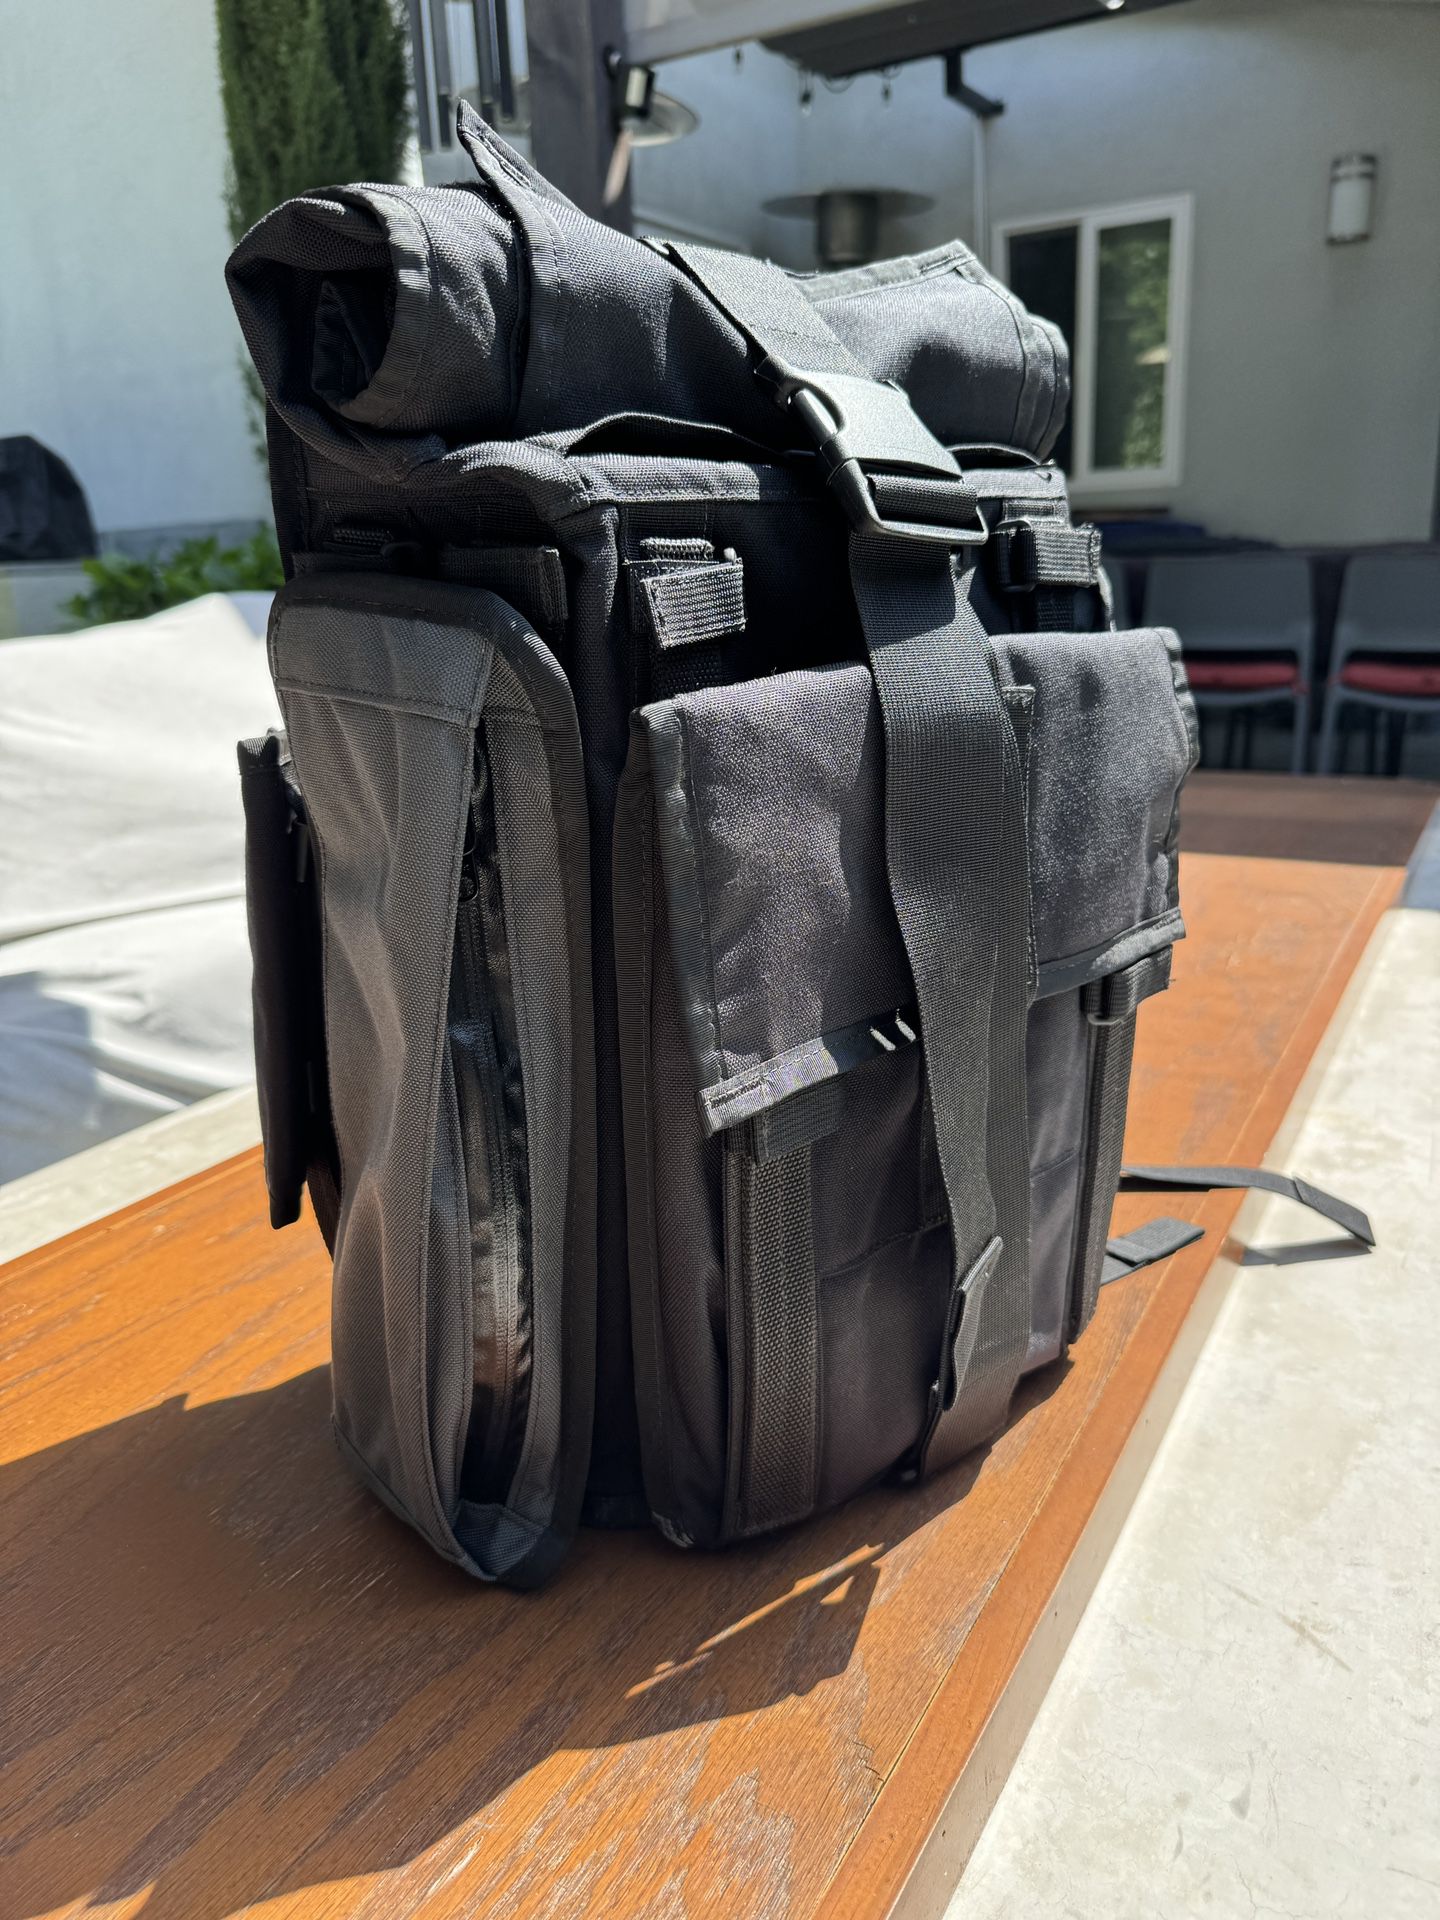 Mission Workshop Rolltop Backpack R6 (MSRP $275) With Accessories 